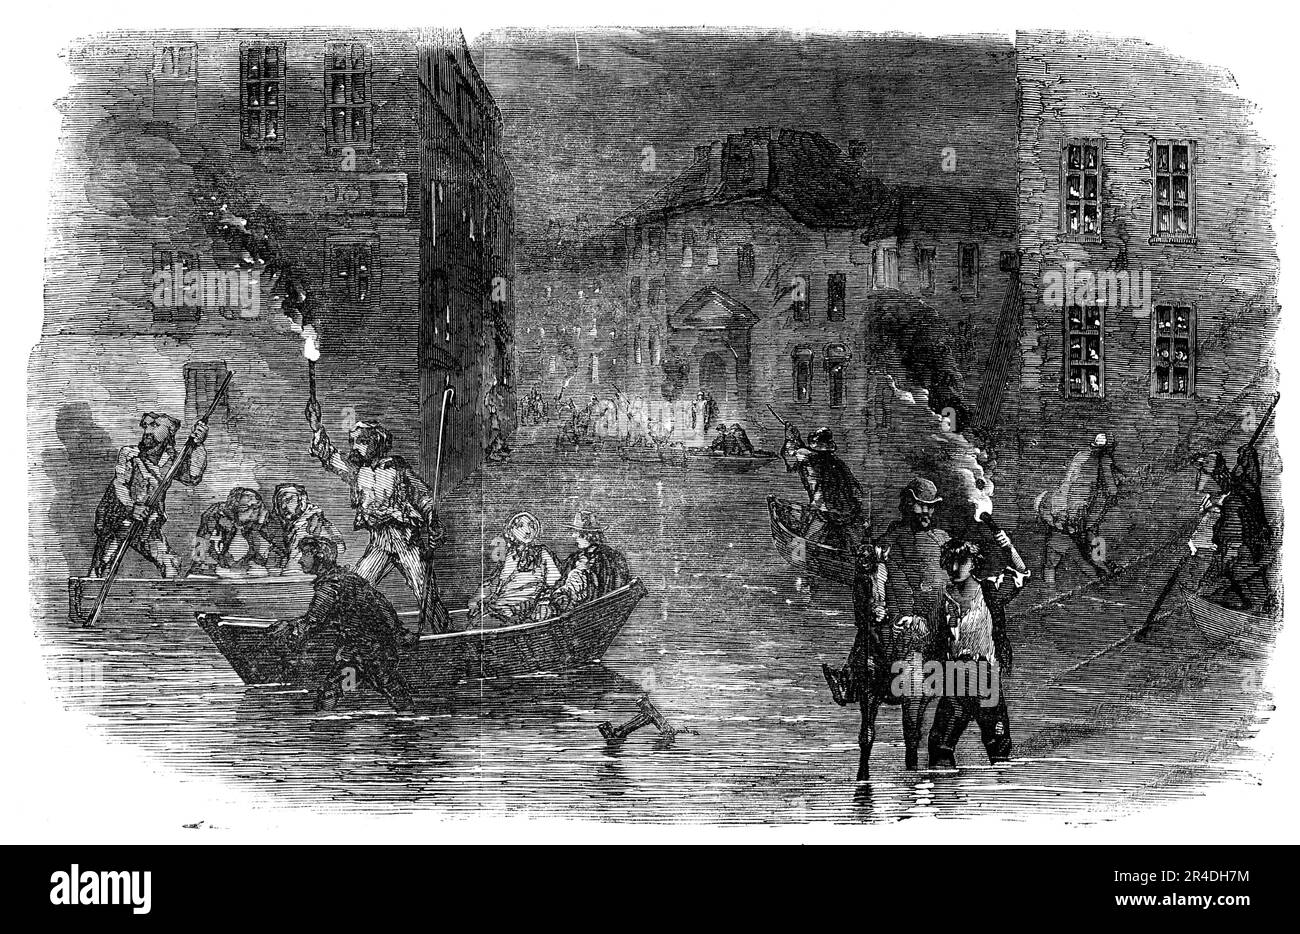 The Inundation at Lyons, 1856. Flooding in France. '...upwards of 10,000 men, women, and children are by this catastrophe thrown out of work, and not only so, but they are without house or home, and too probably without bread...A number of bridges have been carried away, and the railway has been intercepted at various points...One house, two stories high, and built apparently with great solidity, was thrown down, and six persons who were in it at the time perished...The Lyons journals of Saturday state that since the previous evening rain had fallen heavily, but the Saone [river] had not risen Stock Photo